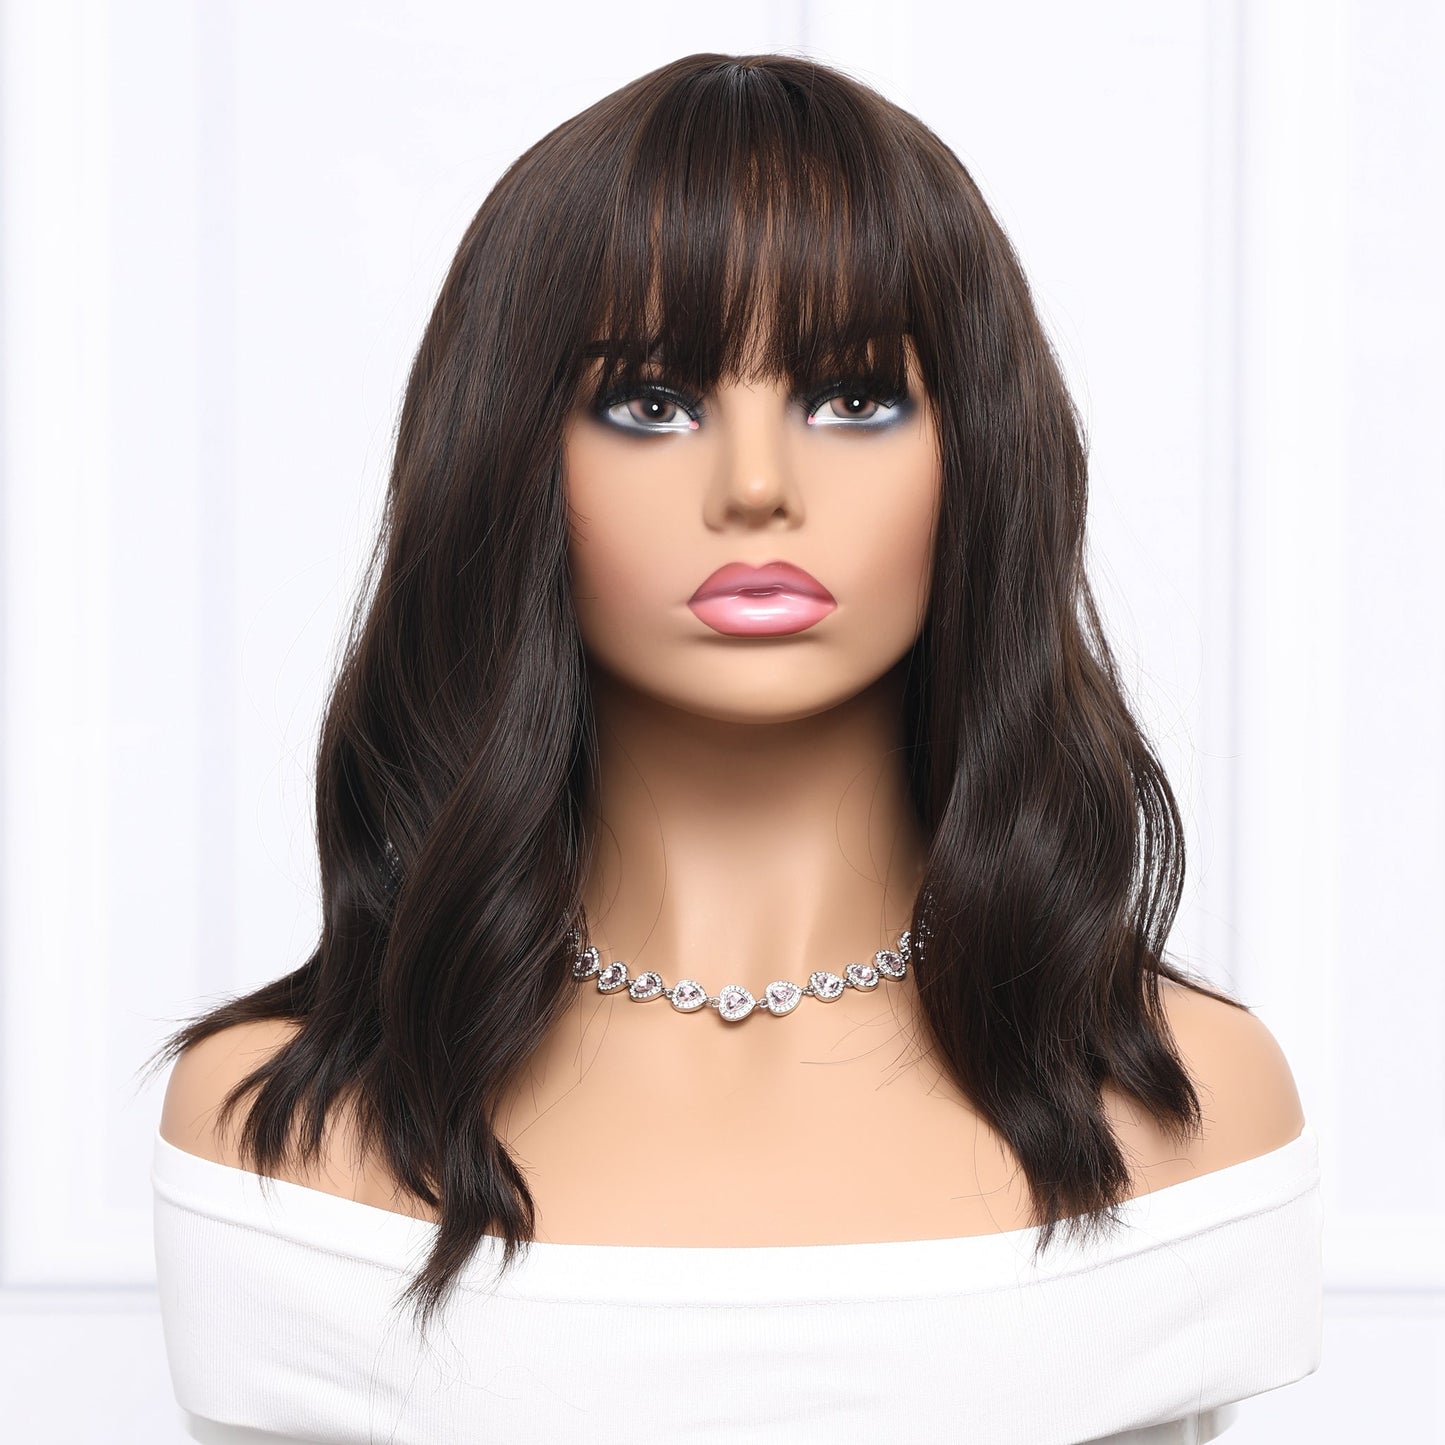 16-inch | Black Loose Wave with Hair Bangs | SM210-4 - TapLike